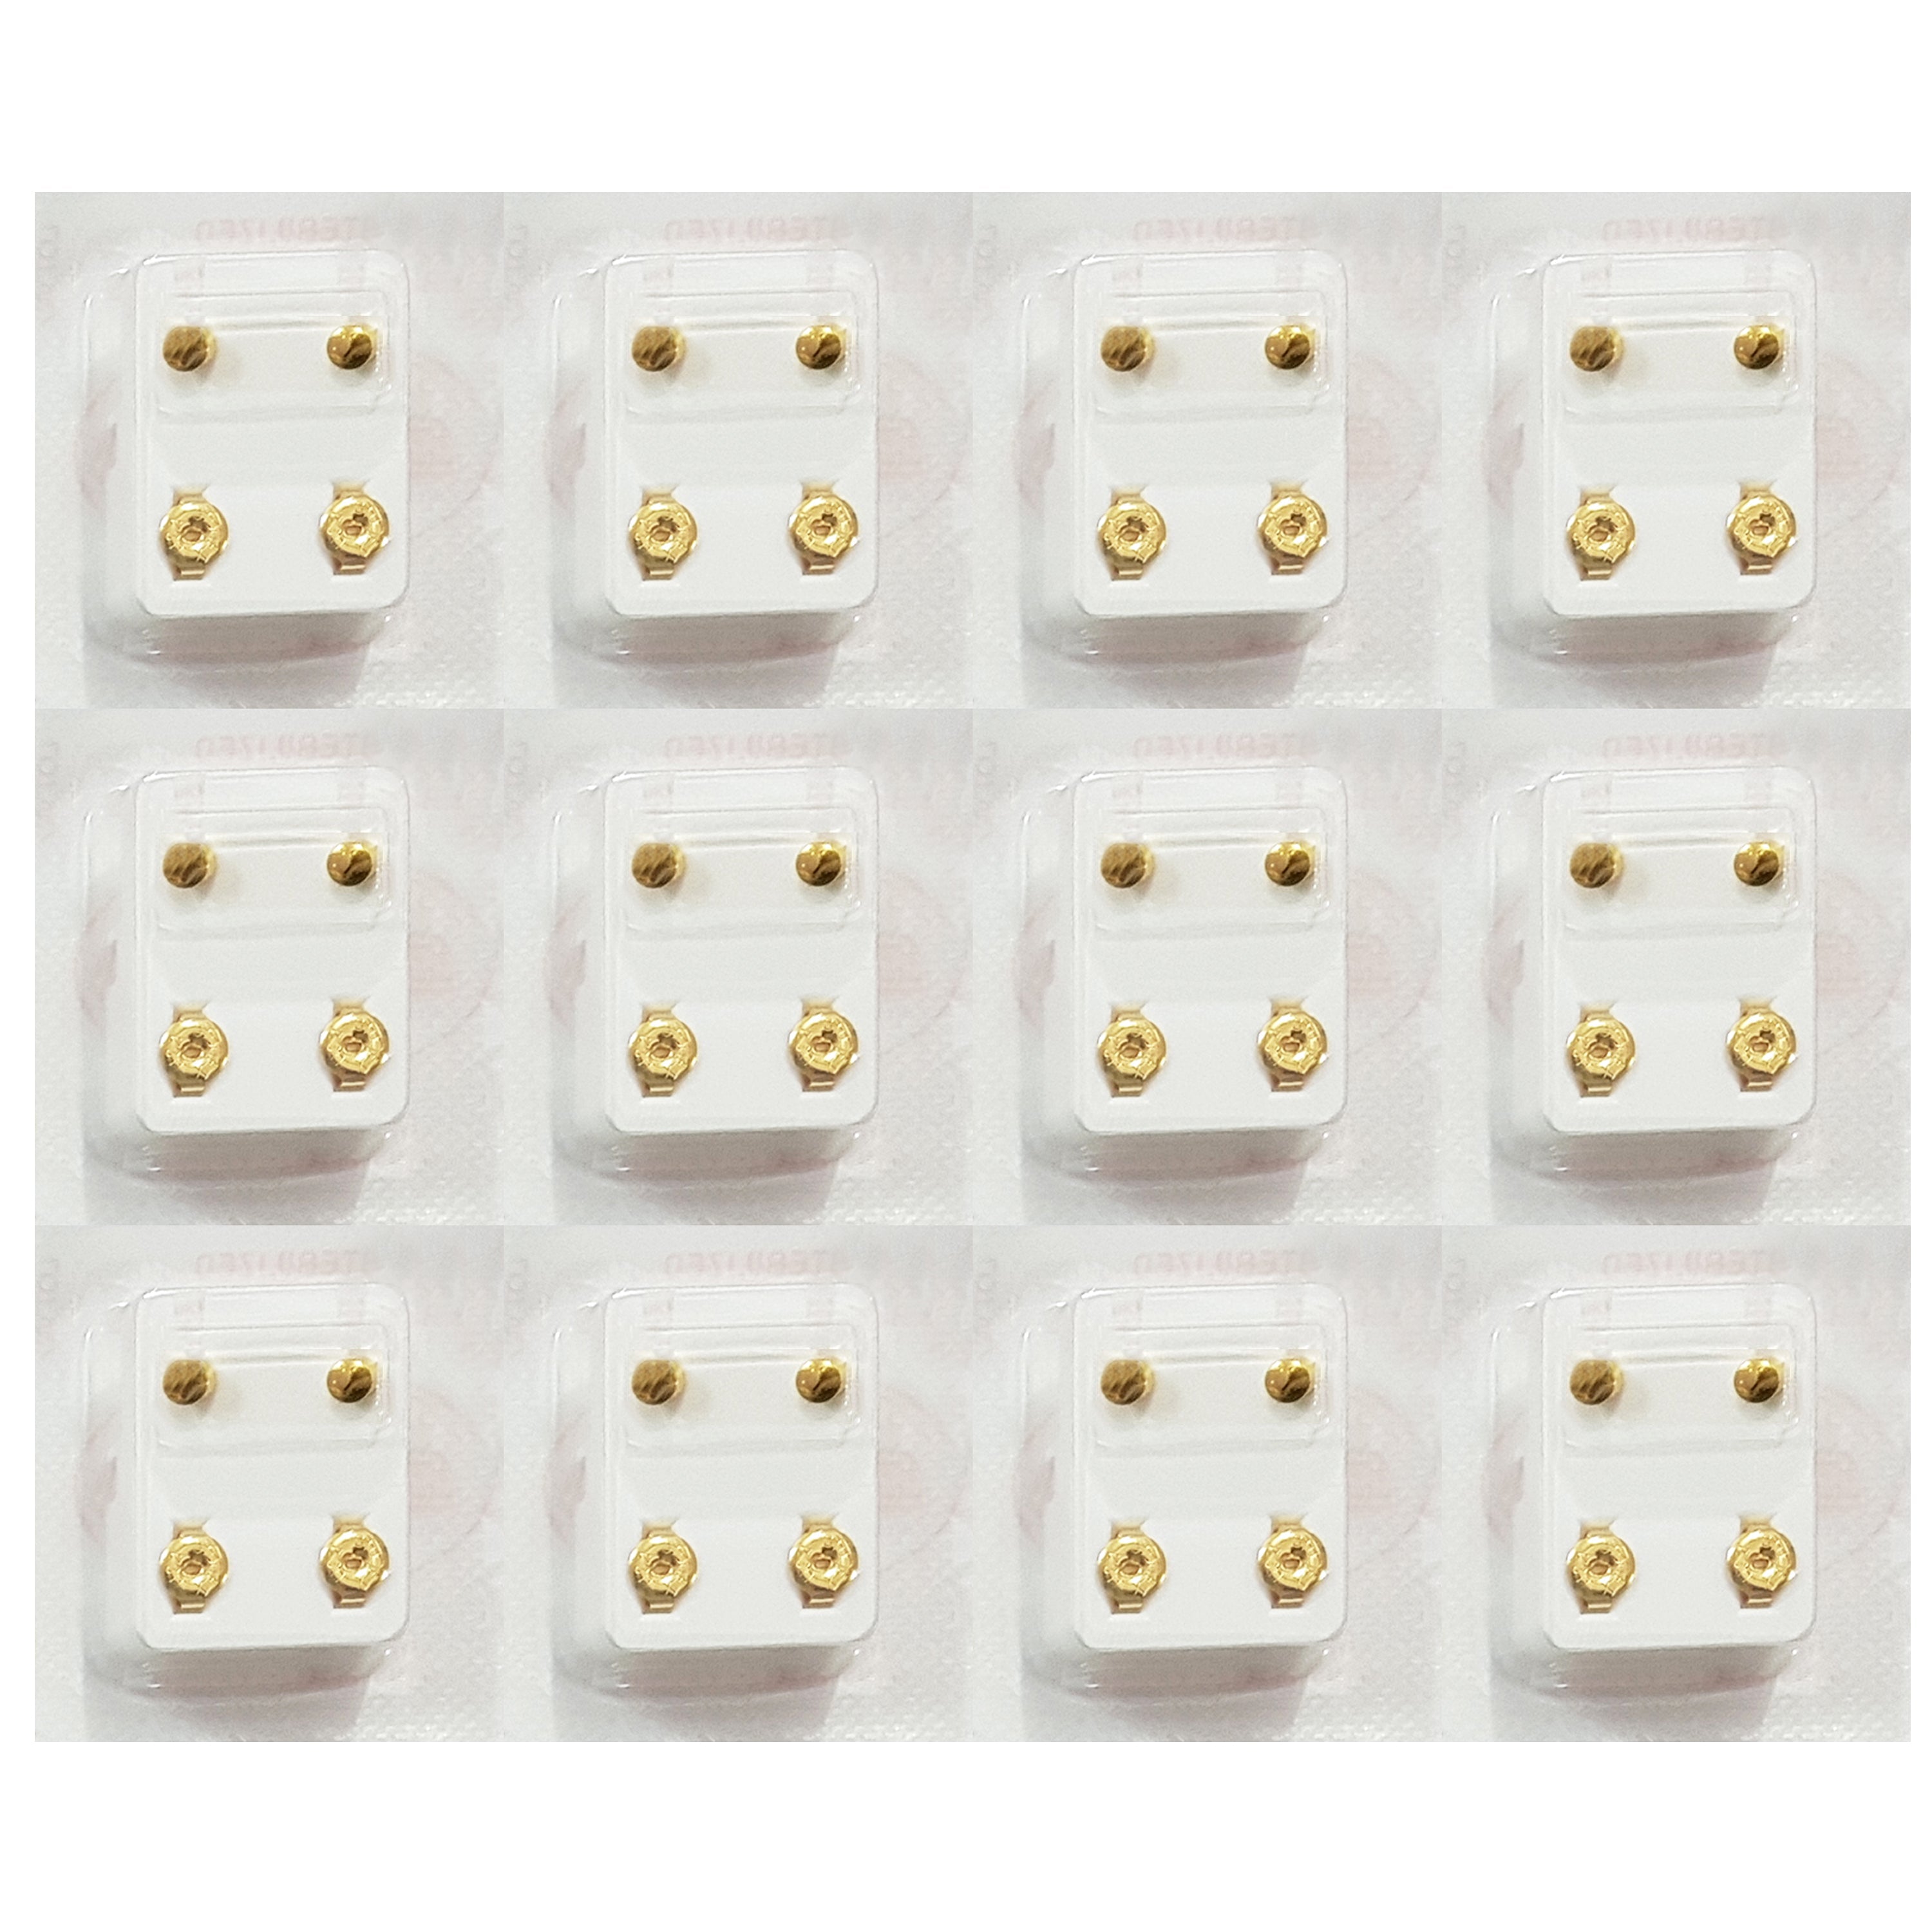 3MM Full Moon 24K Pure Gold Plated Piercing Ear Stud (12 Pair)